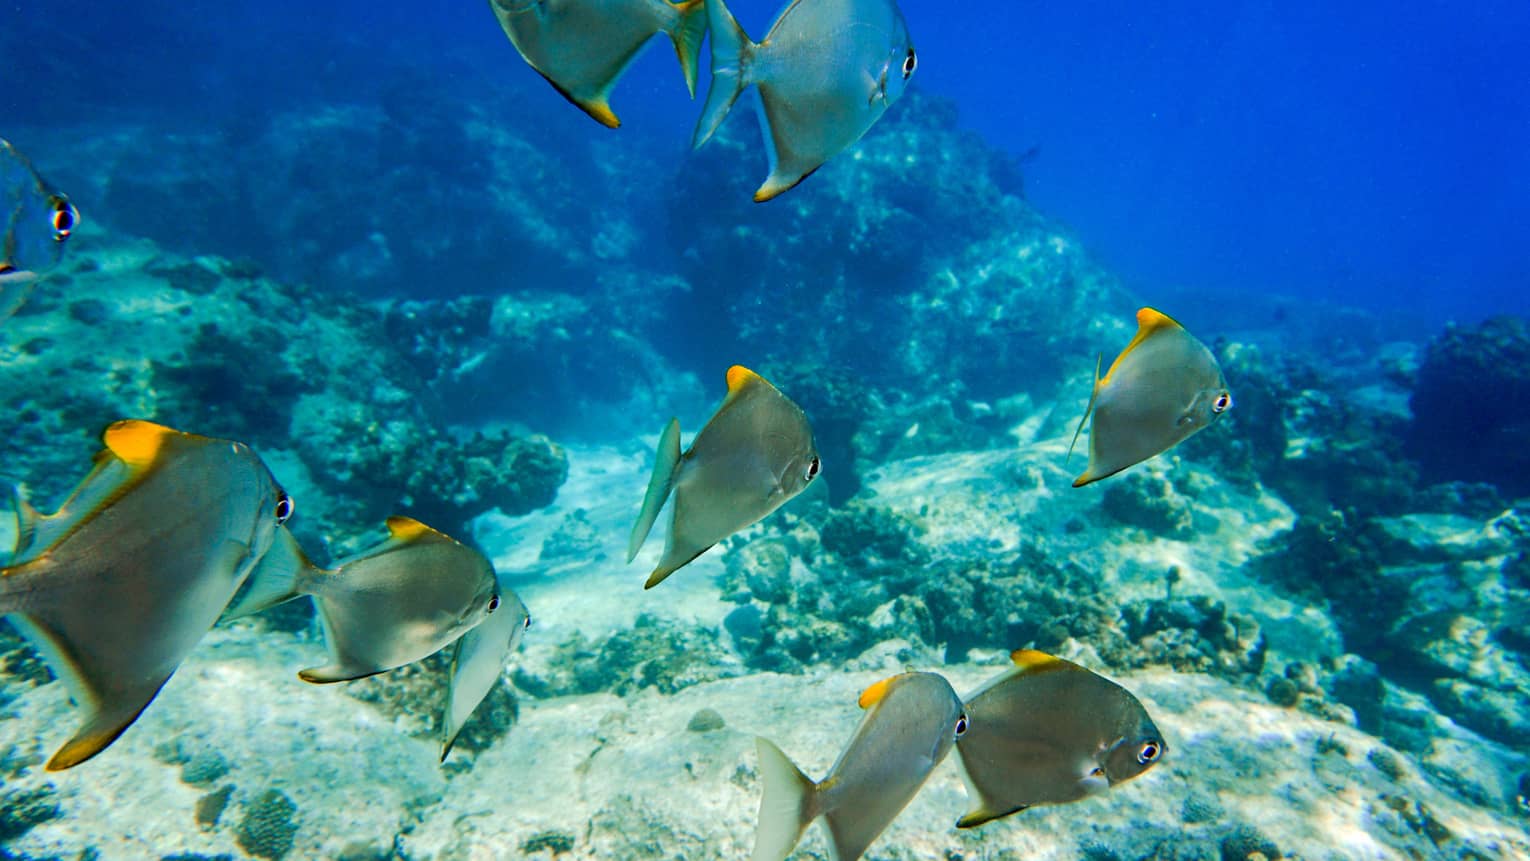 Blue and yellow fish swimming by the ocean floor.